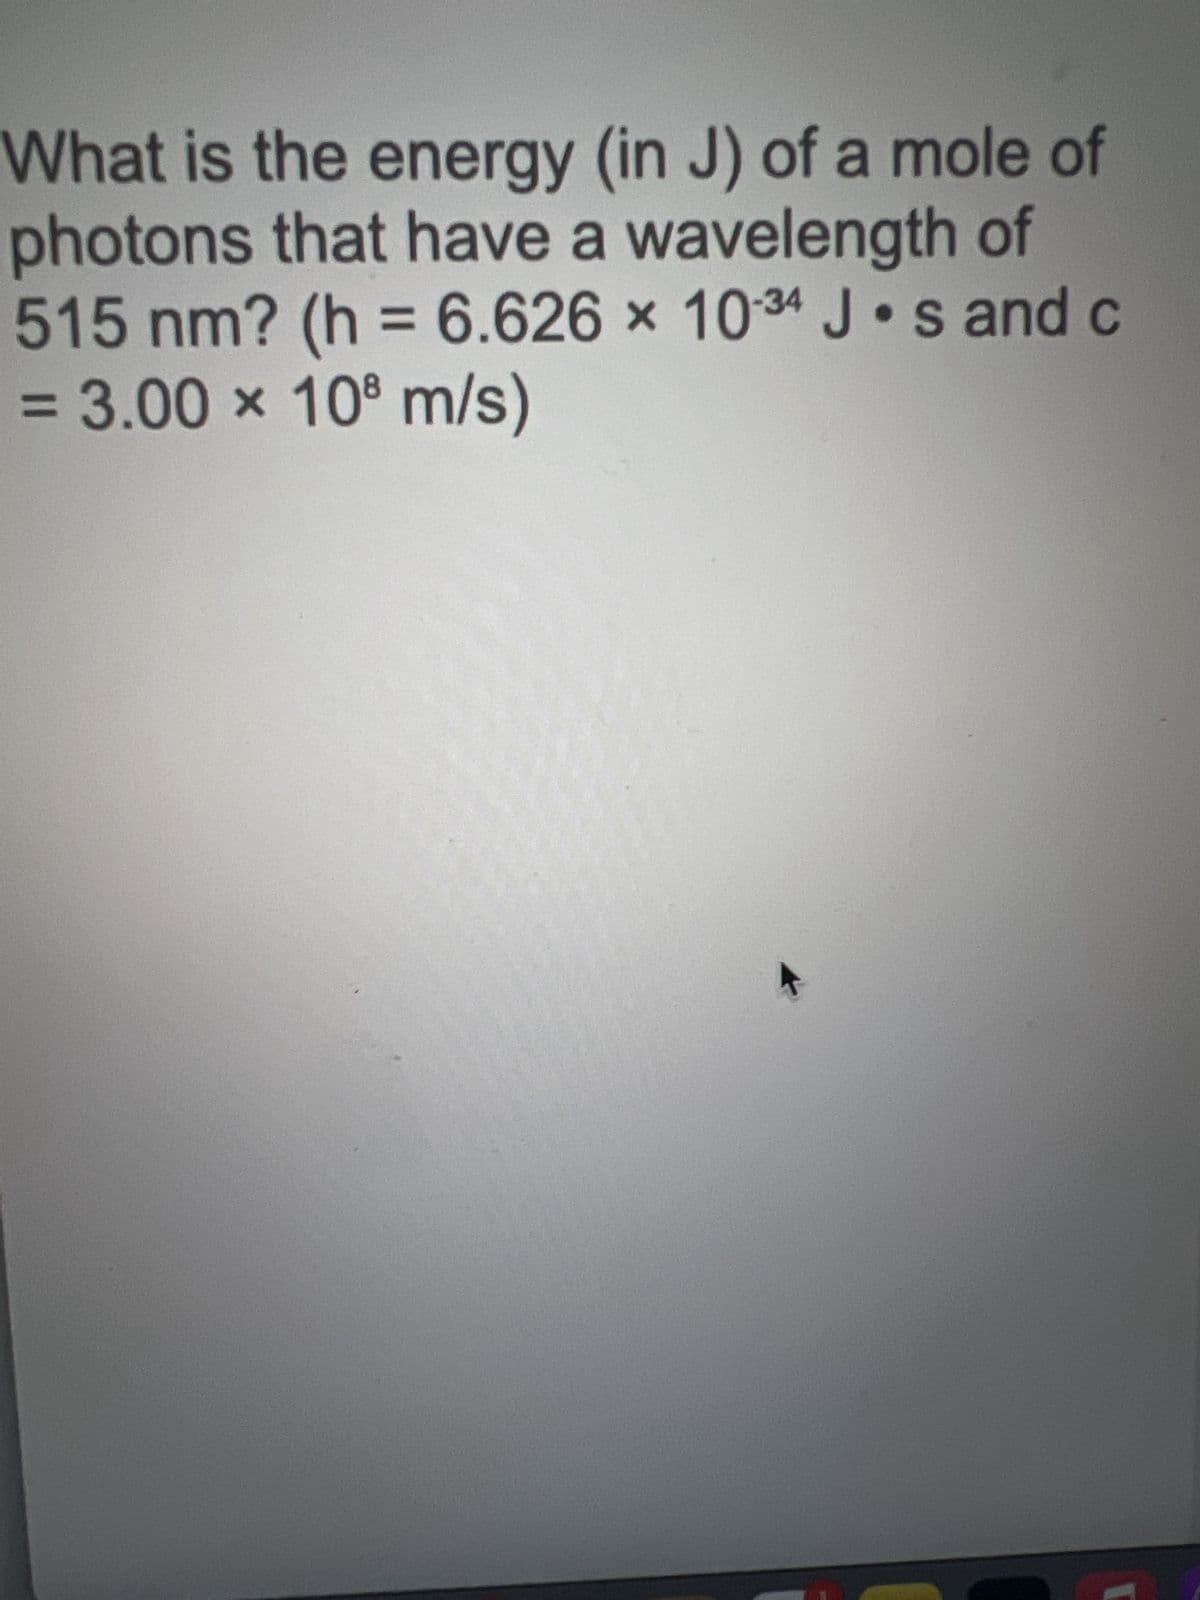 What is the energy (in J) of a mole of
photons that have a wavelength of
515 nm? (h= 6.626 x 1034 Js and c
= 3.00 x 108 m/s)